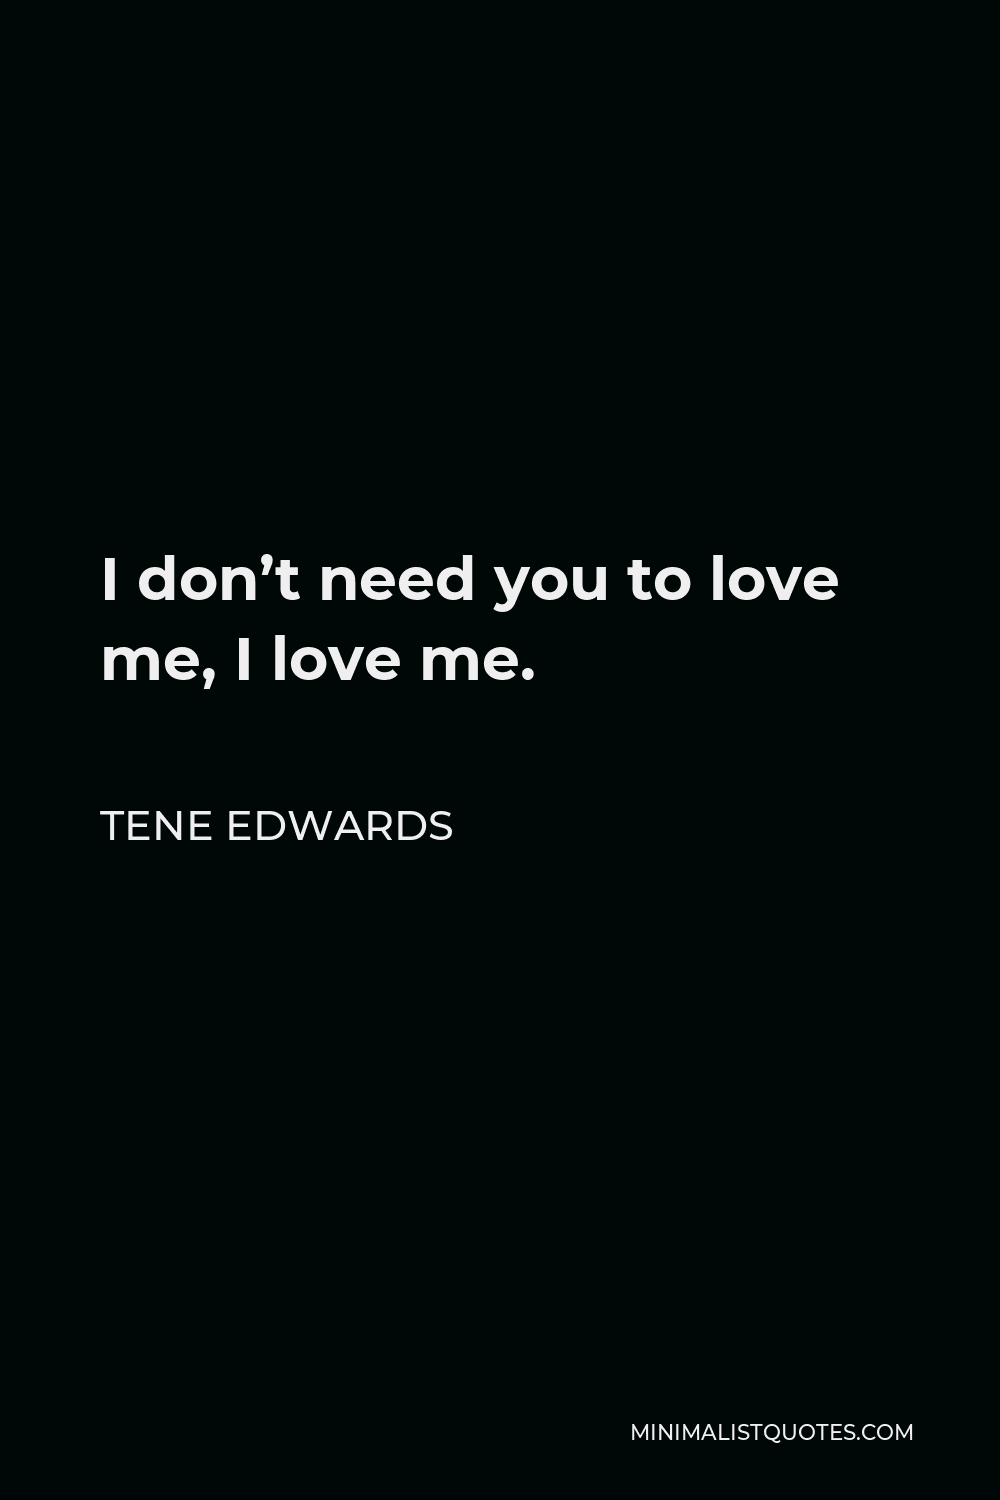 Tene Edwards Quote - I don’t need you to love me, I love me.